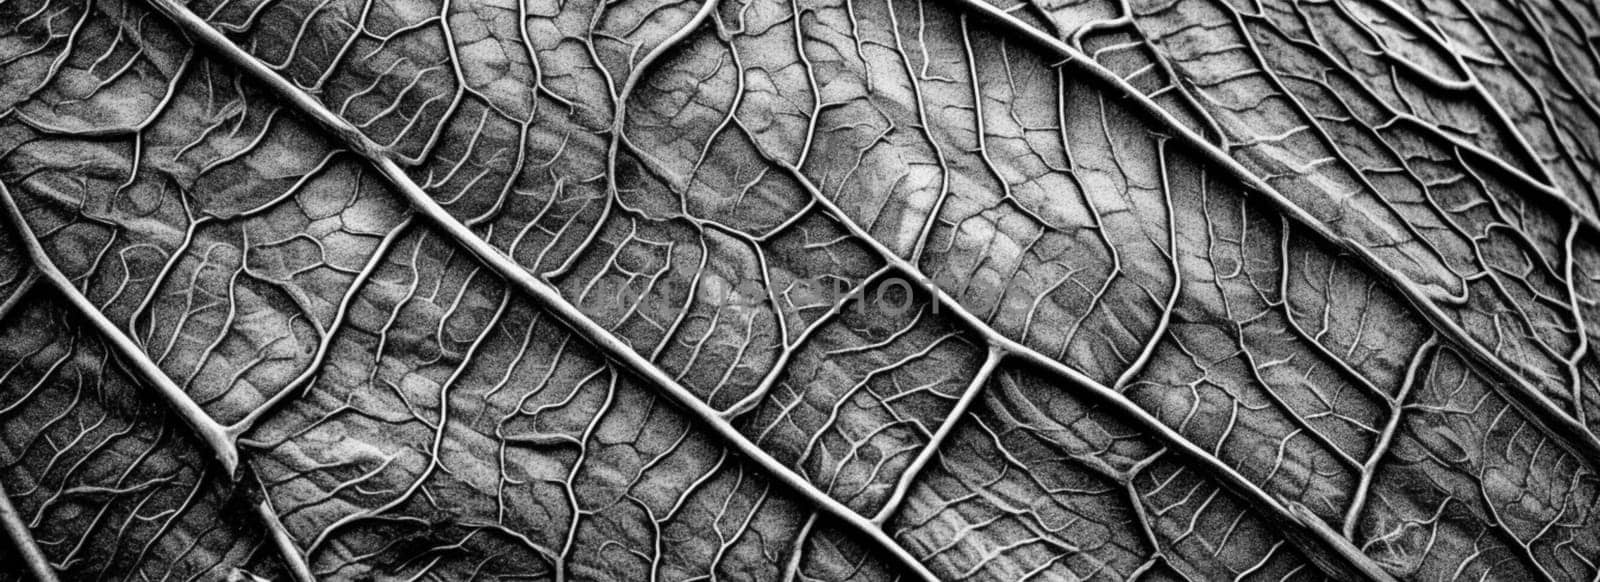 Abstract macro leaf patterns monochrome background. High resolution black and white image.